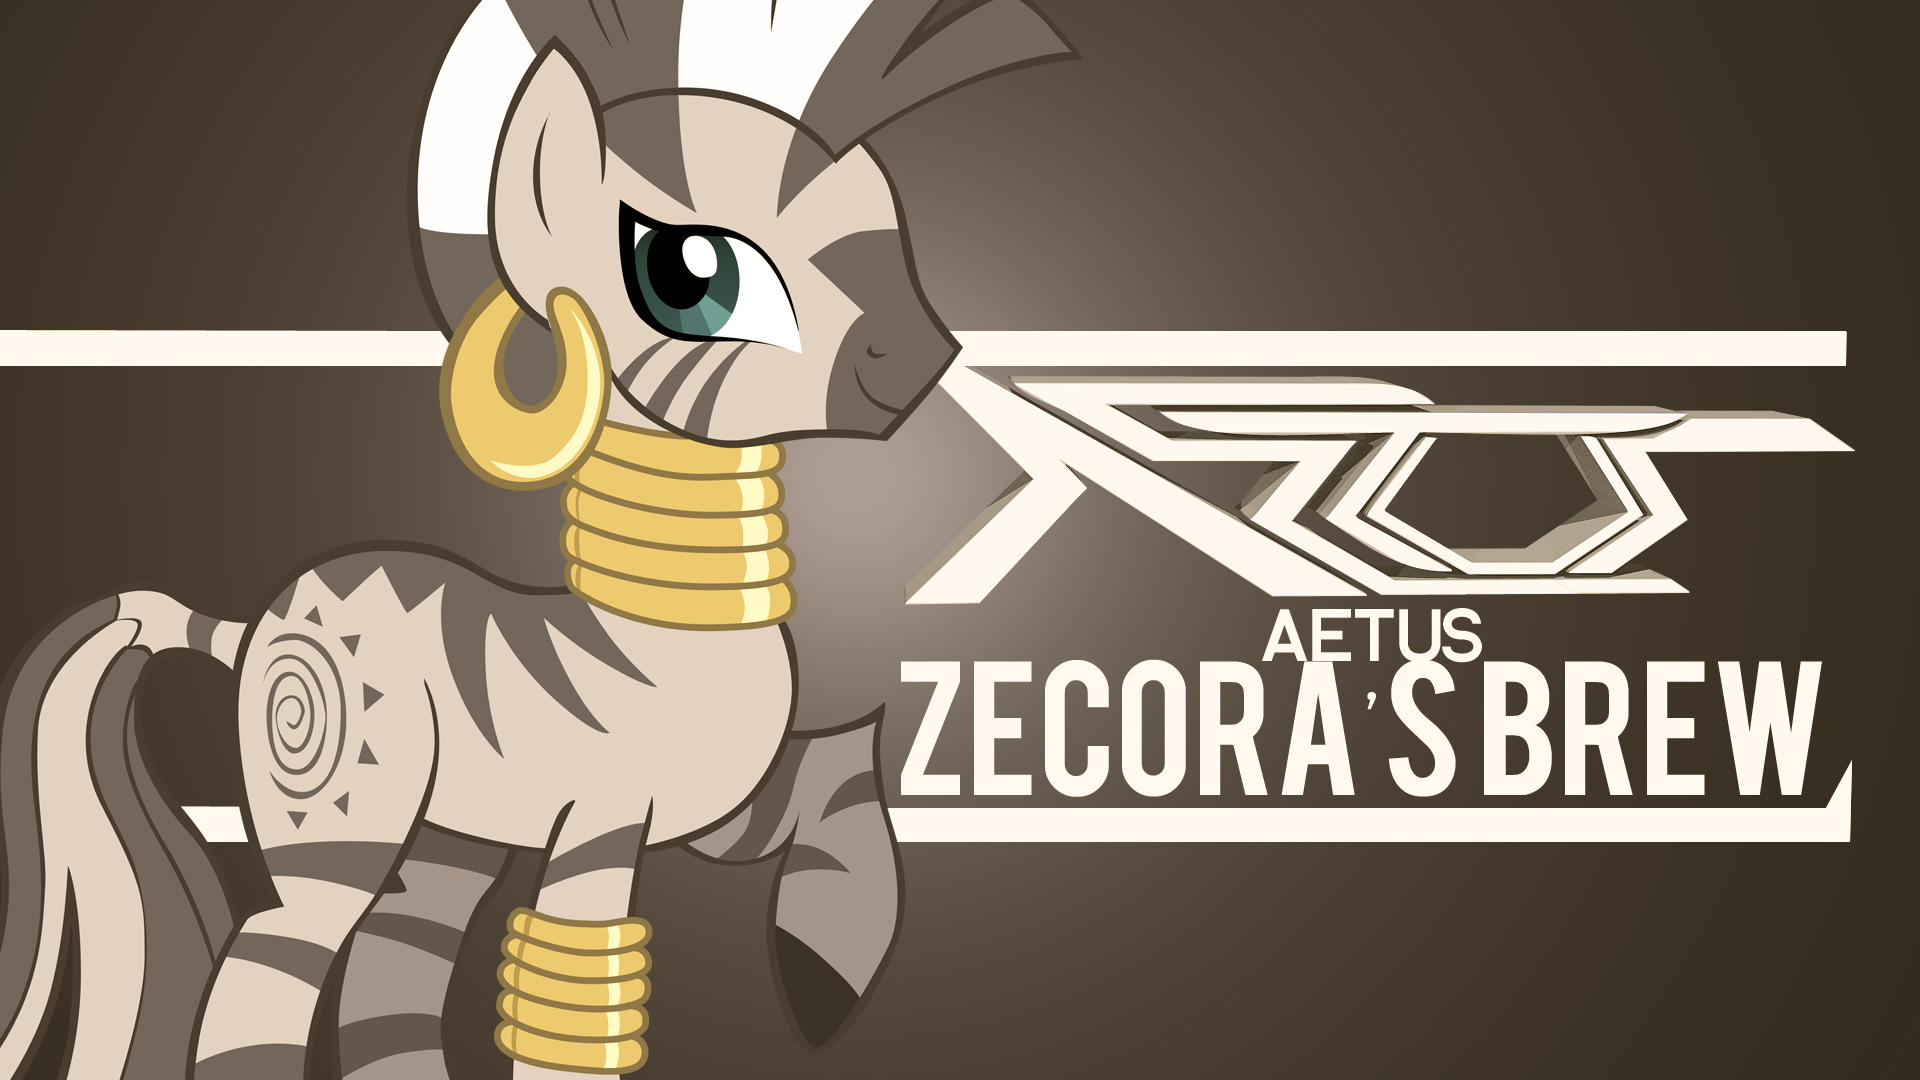 Aetus: Zecora's Brew Cover Art by MikoyaNx